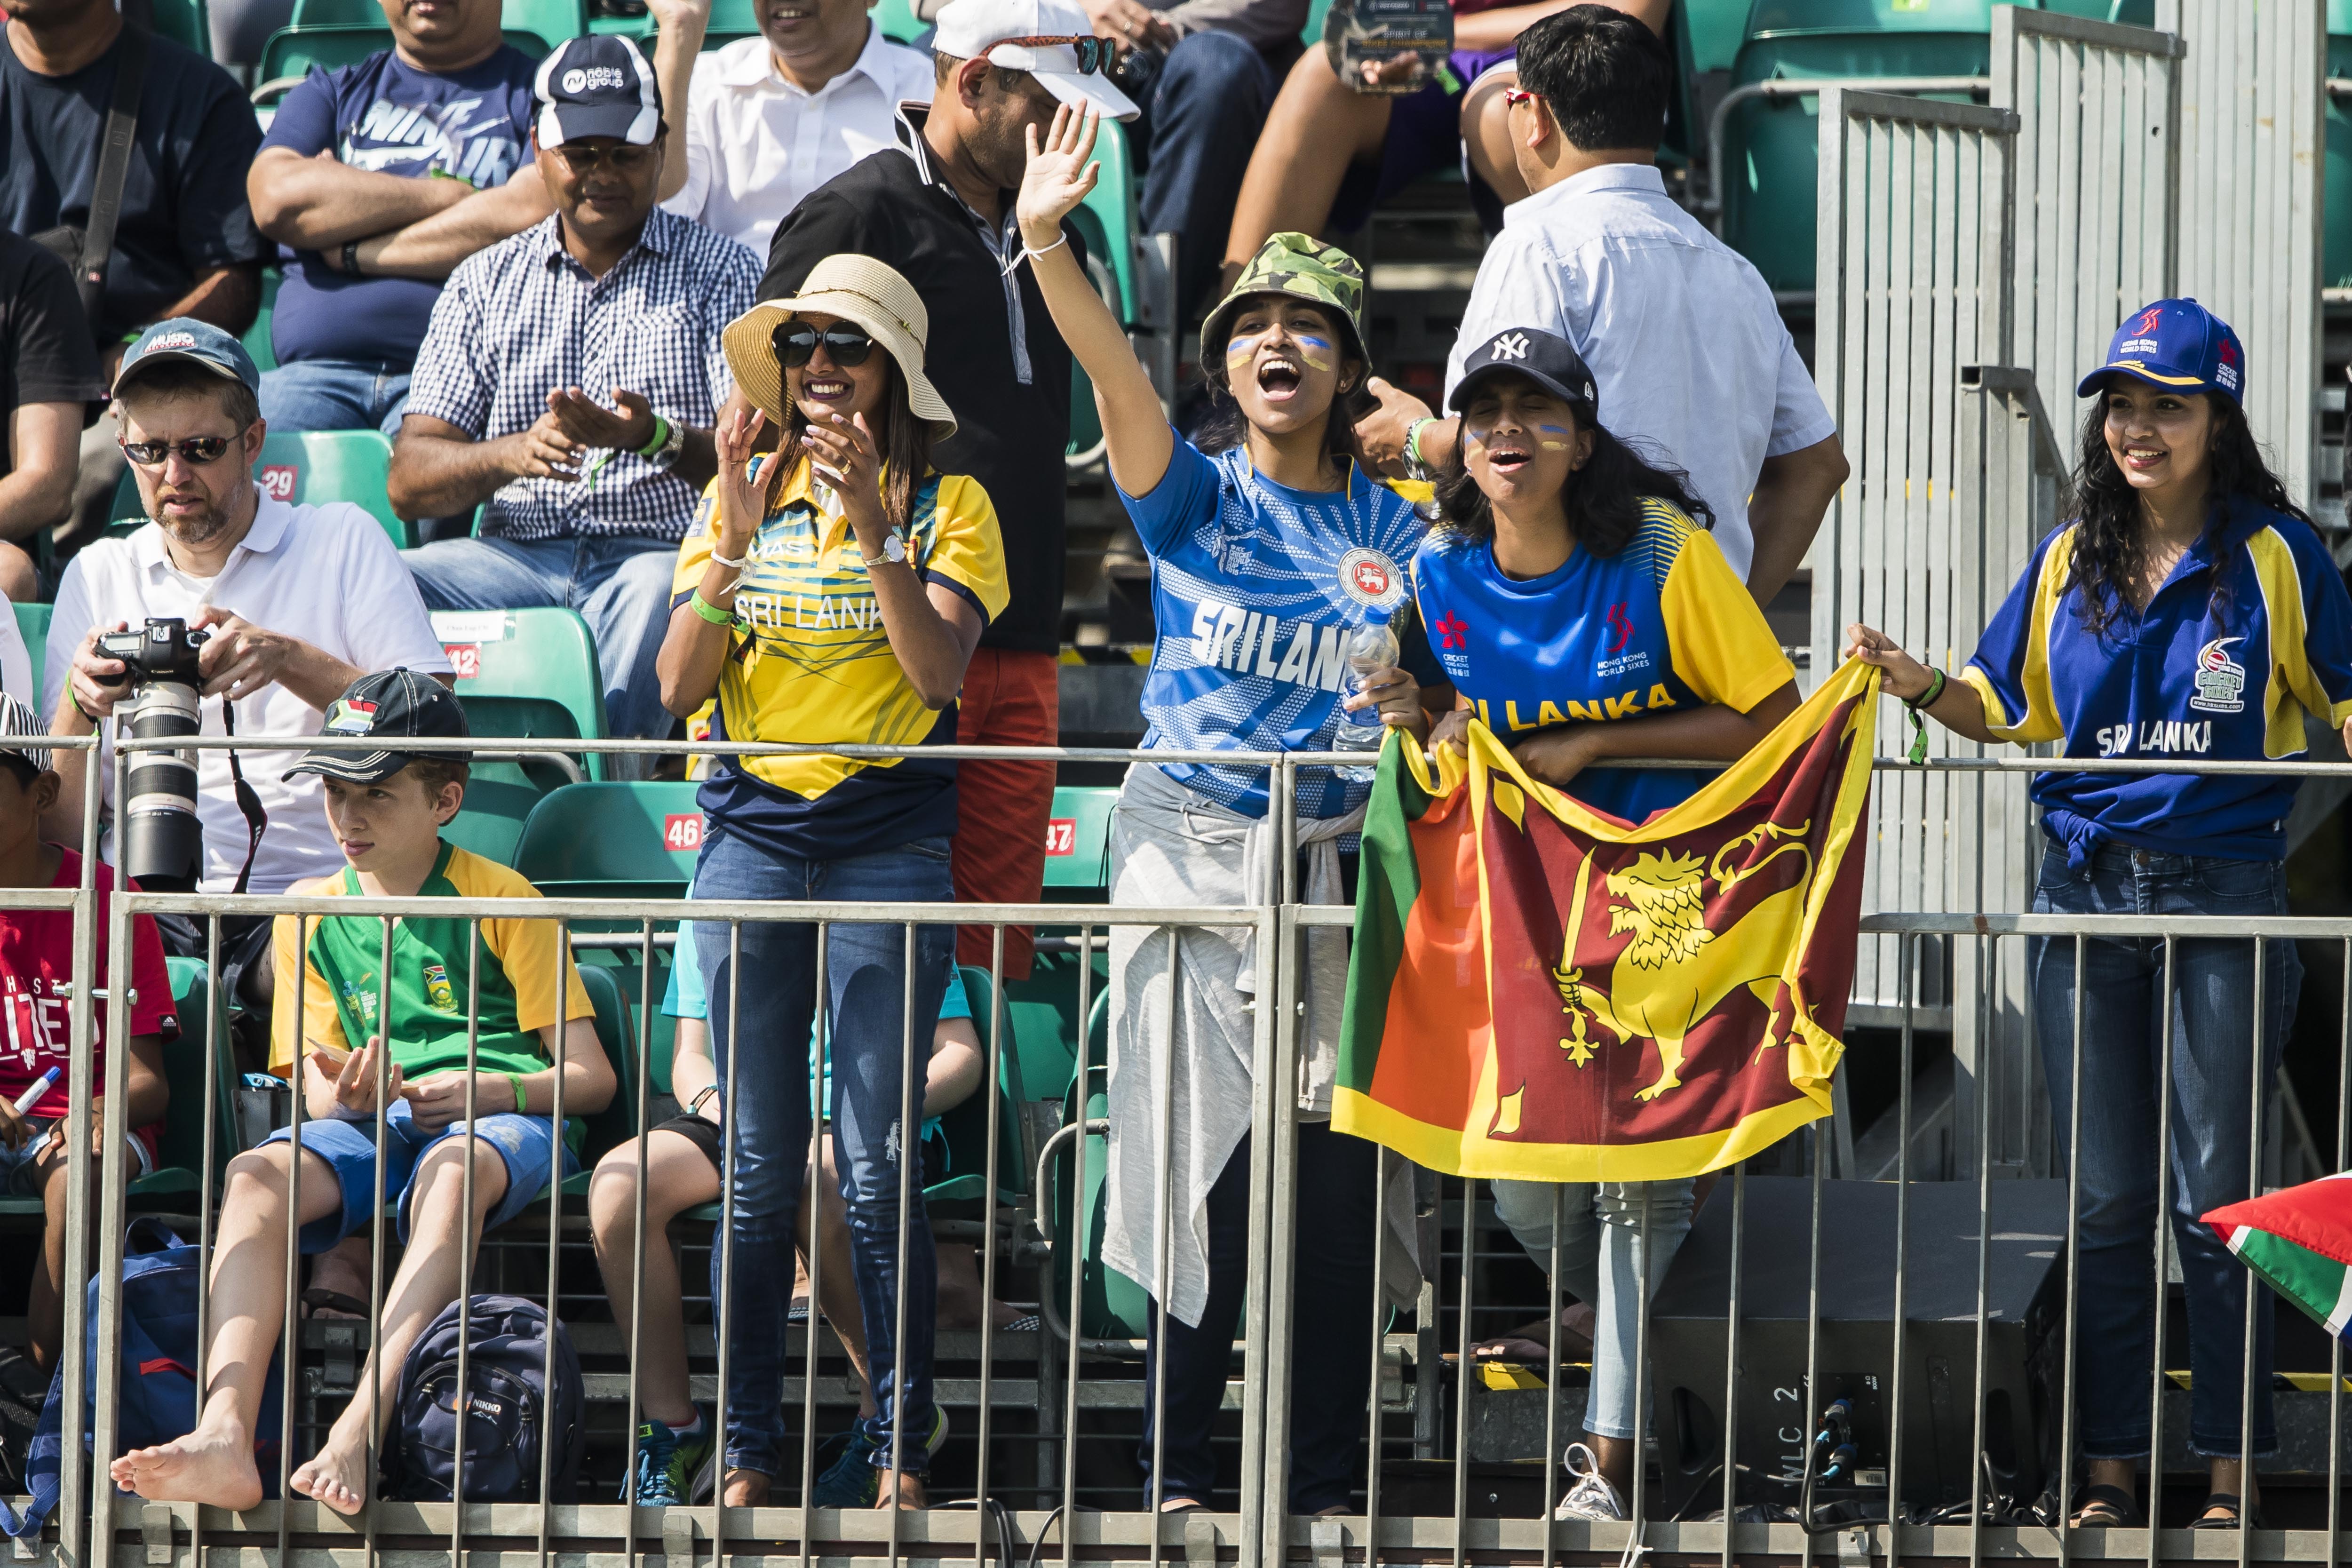 VIDEO | Sri Lanka find new ways to embarrass fans, gets five-run penalty for clumsiness